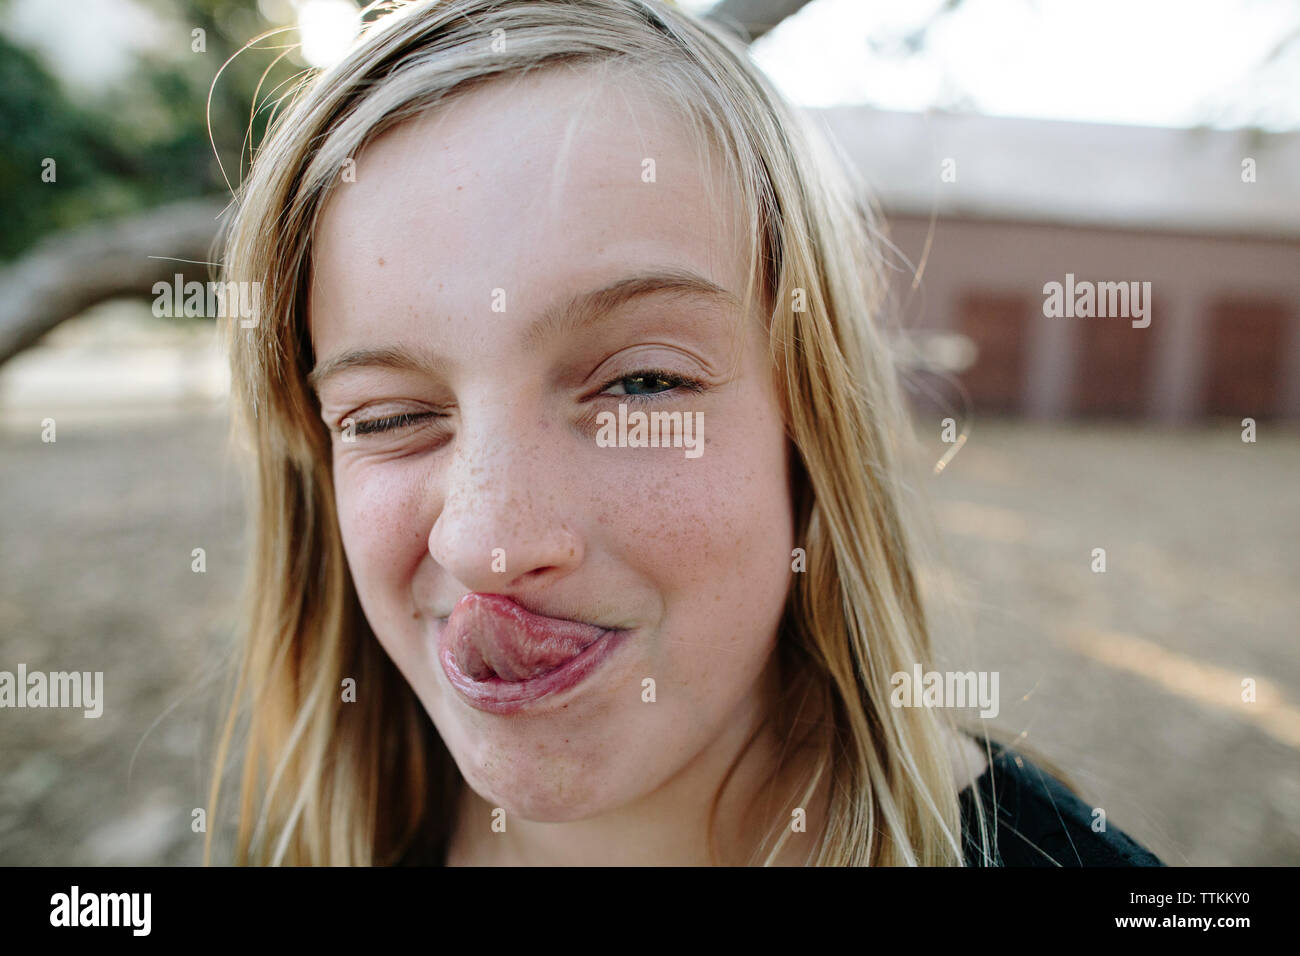 Close-up portrait of playful girl sticking out tongue while winking at farm Stock Photo